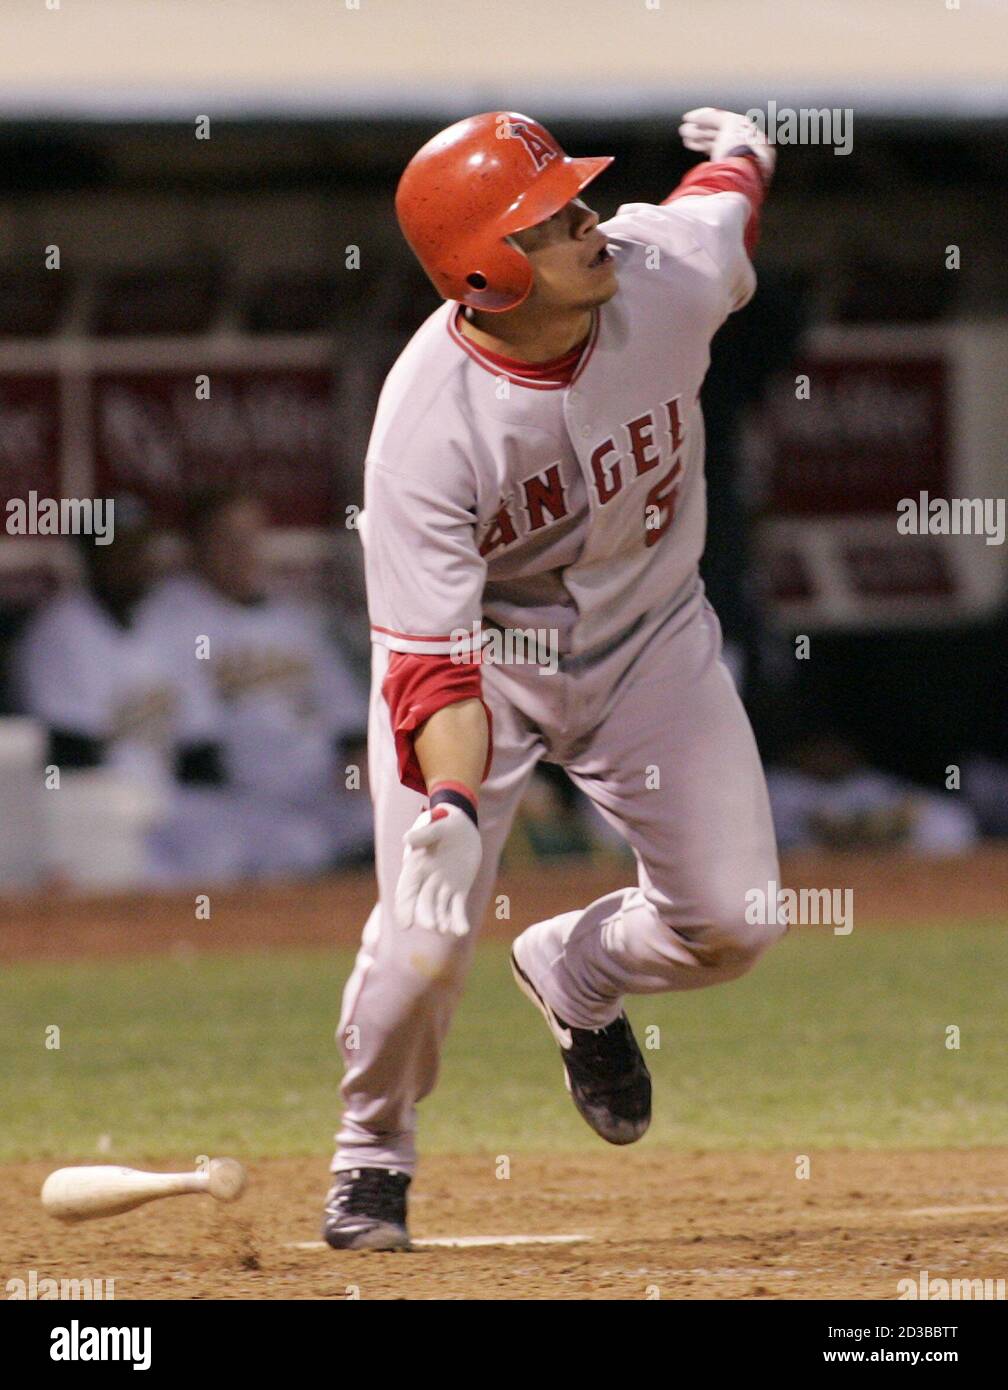 Anaheim Angels' Alfredo Amezaga watches his grand slam in the sixth inning  off of Oakland Athletics pitcher Joe Blanton in Oakland, California,  October 1, 2004. REUTERS/Kimberly White KW Stock Photo - Alamy